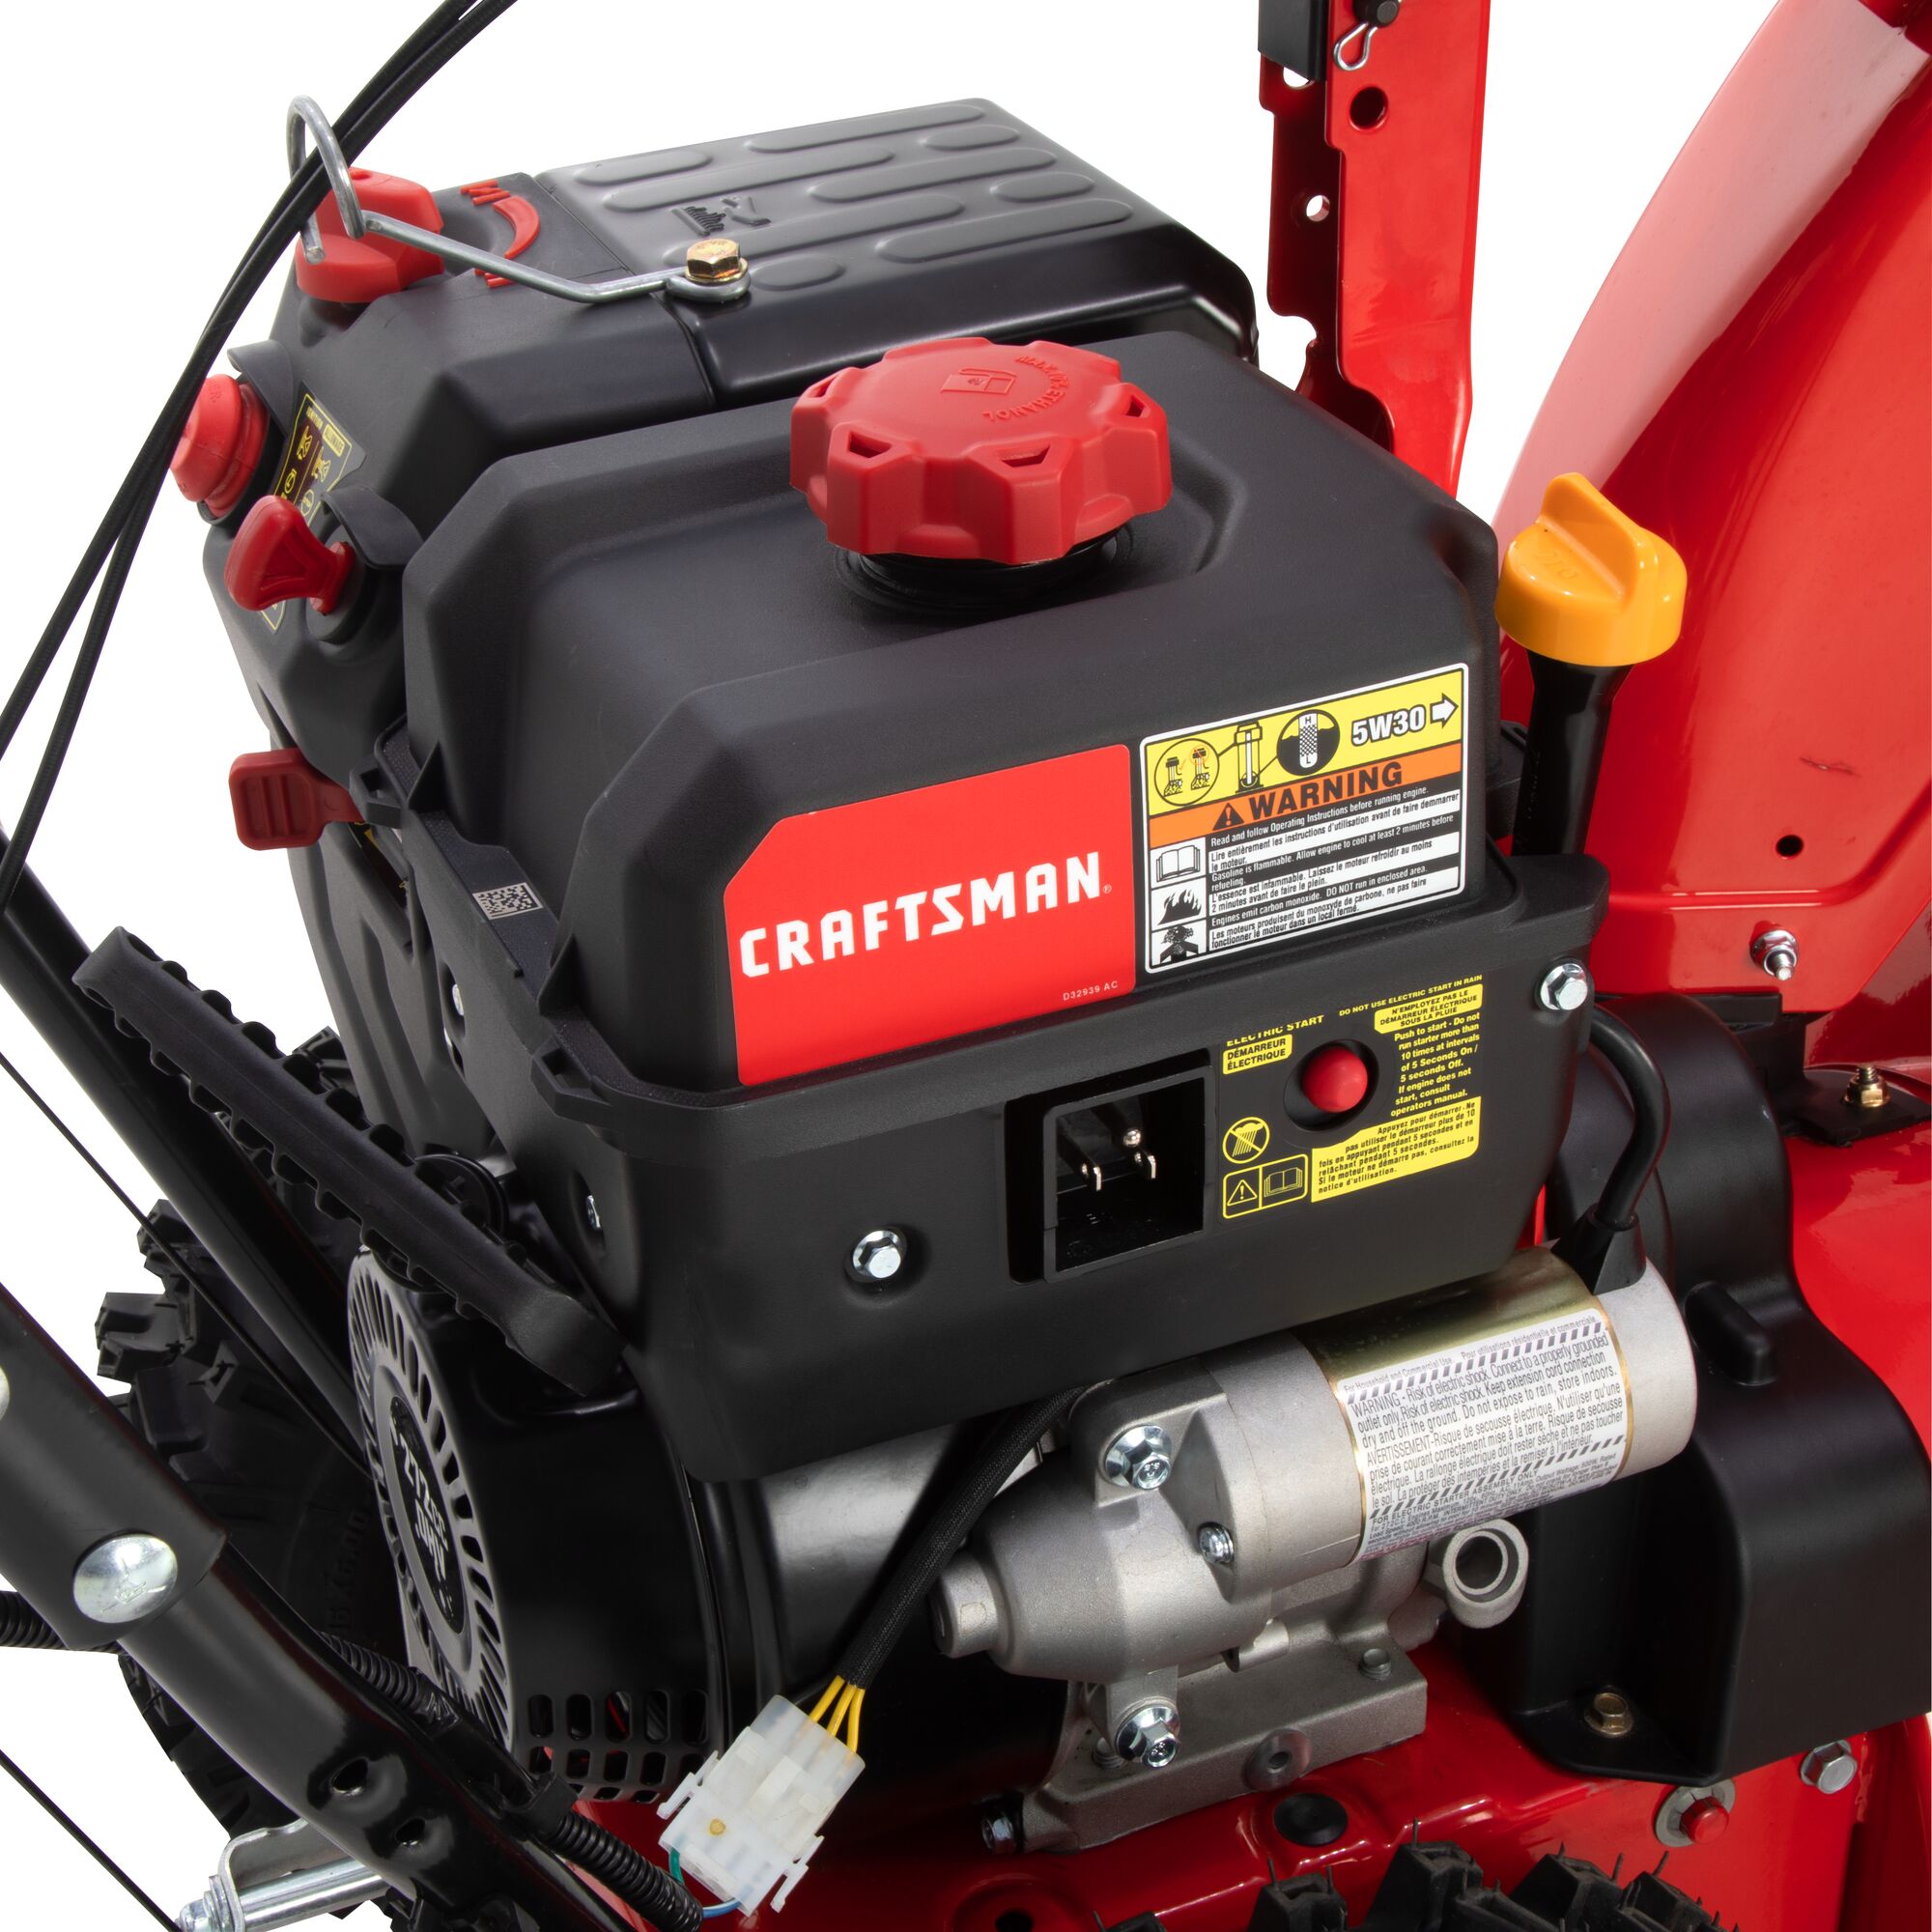 CRAFTSMAN Select 28 Snow Blower on white background